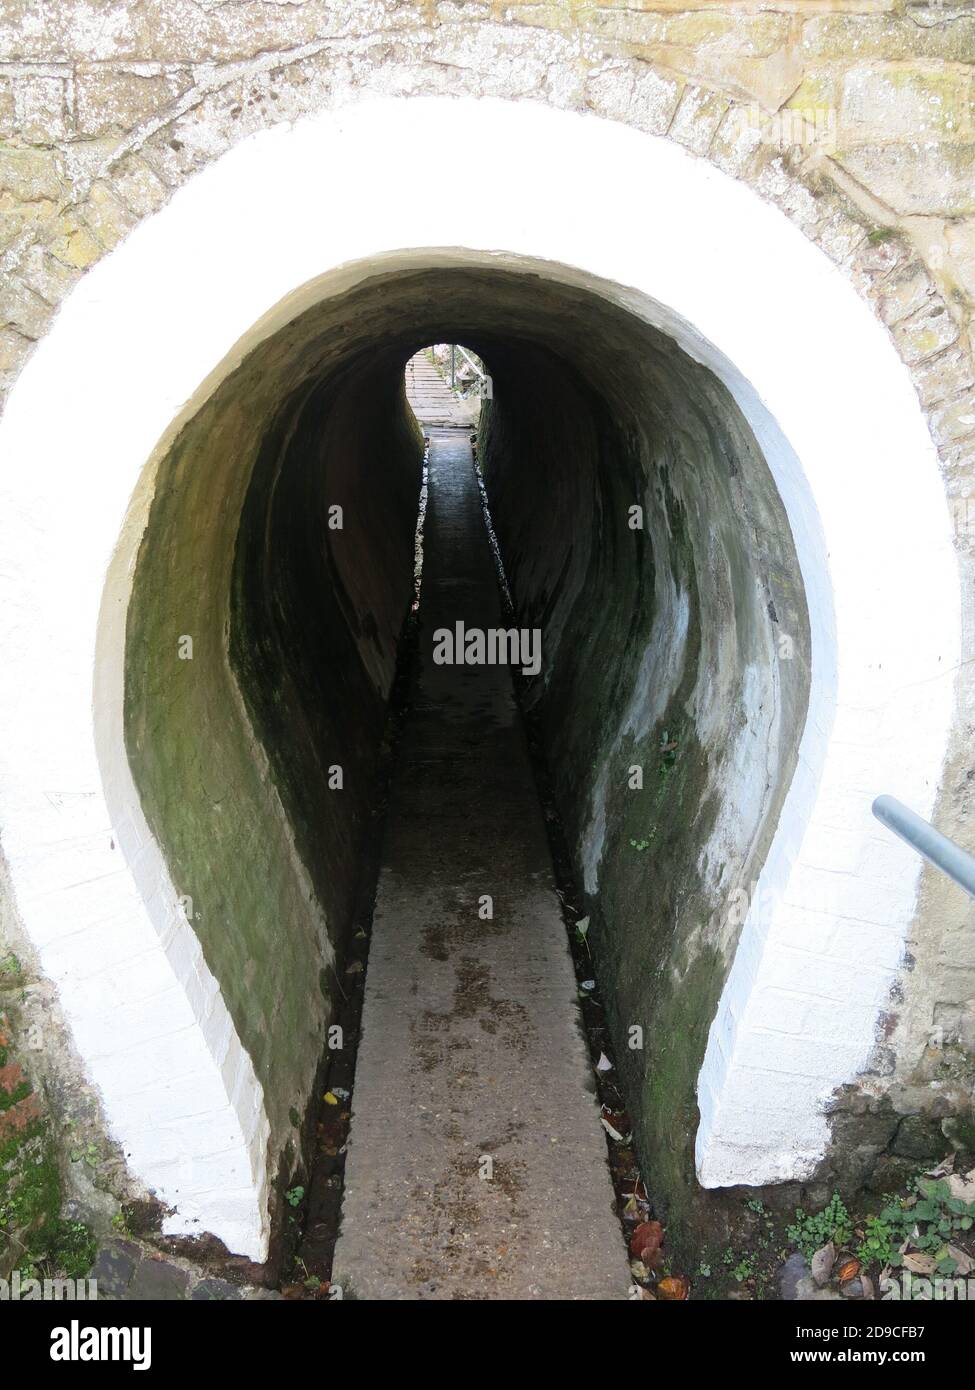 The horseshoe-shaped entrance to the Grade II listed Horse Tunnel ...